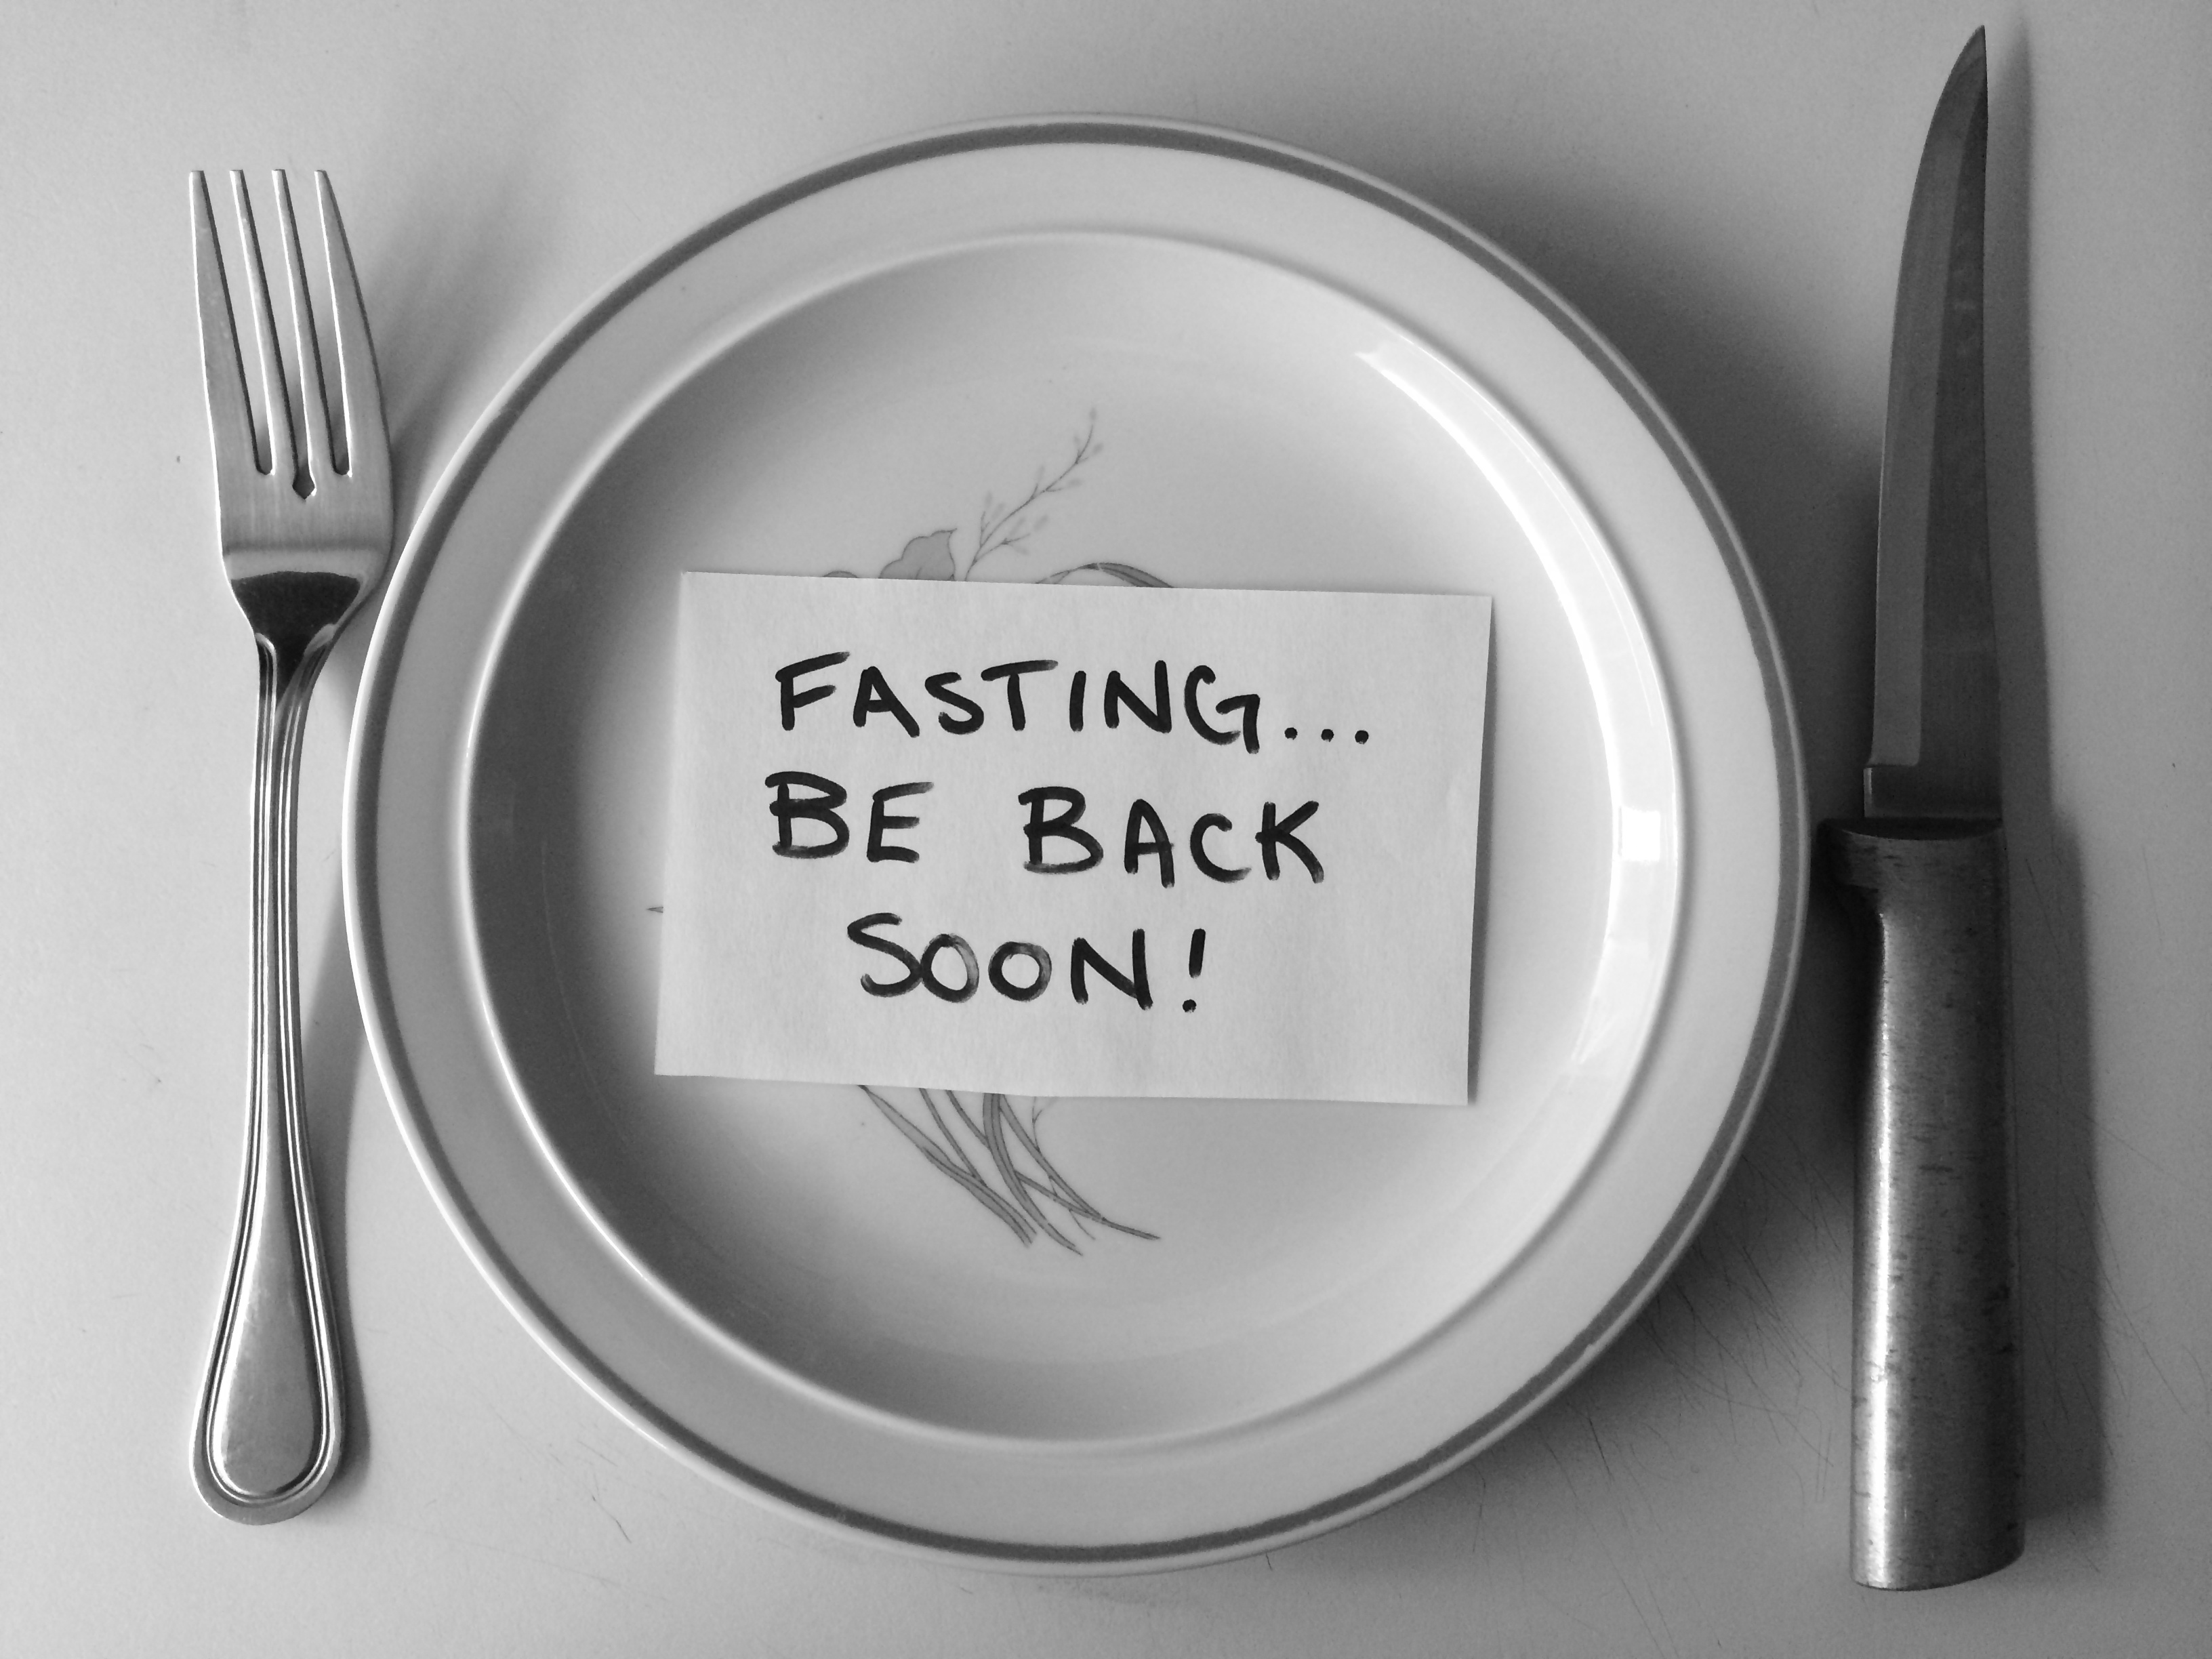 Fasting Will Slow Your Metabolism Down Significantly: Let me preface this one with this: yes, fasting can slow down your metabolism. However, just because you wake up and don't eat until 2 in the afternoon, that doesn't mean your metabolism has slowed down significantly. In fact according to this study, you can go around 72 hours without eating before your metabolism is majorly affected. If you decide to take things to the extreme and say fast for a week or so, you may be starting to slow down your metabolism significantly.